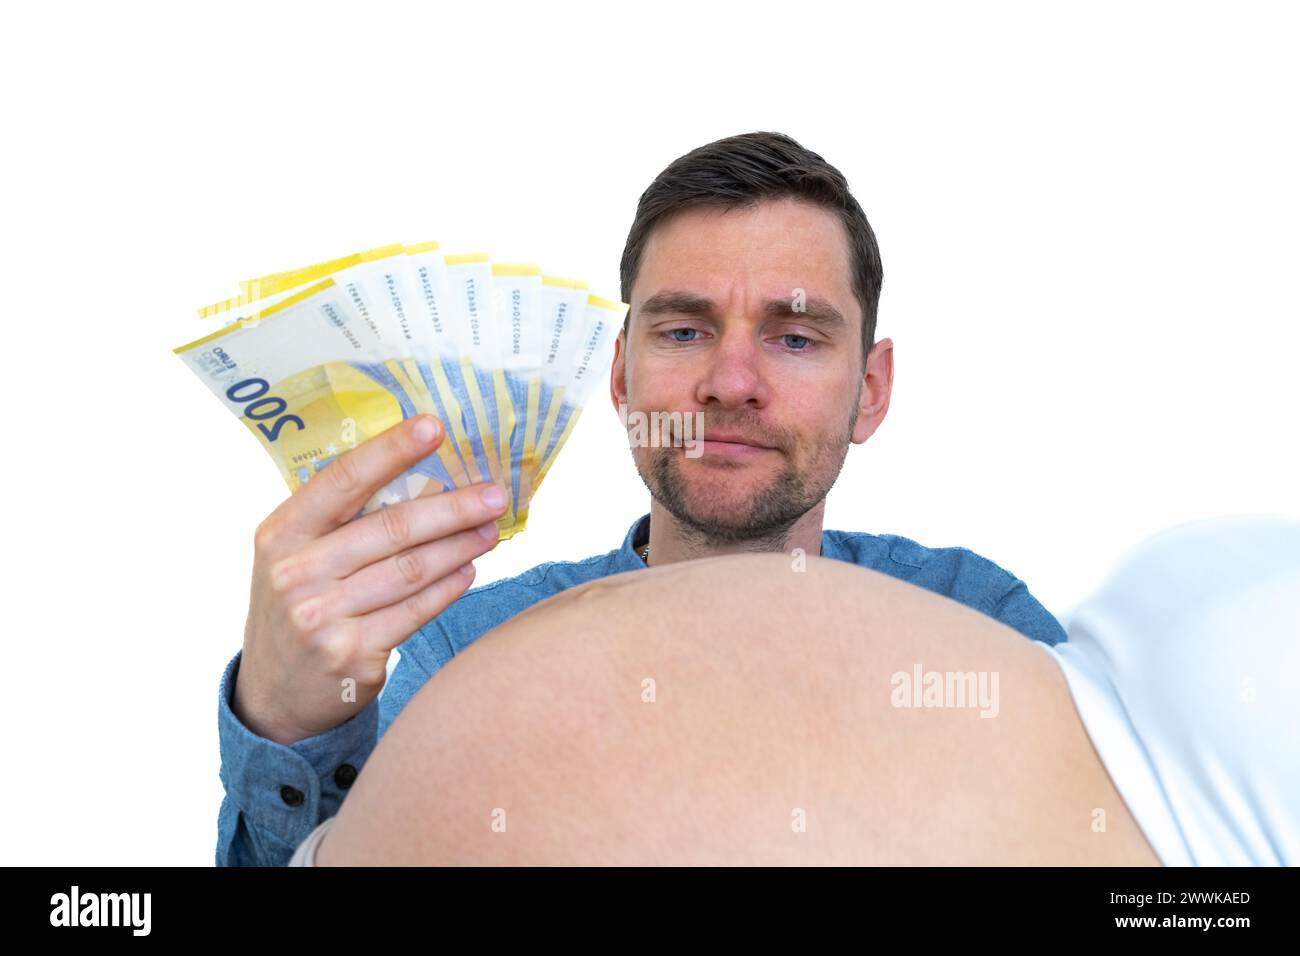 Description: Father-to-be with banknotes in hand contemplates pregnant baby bump thoughtfully. Last month of pregnancy - week 39. White background. Br Stock Photo